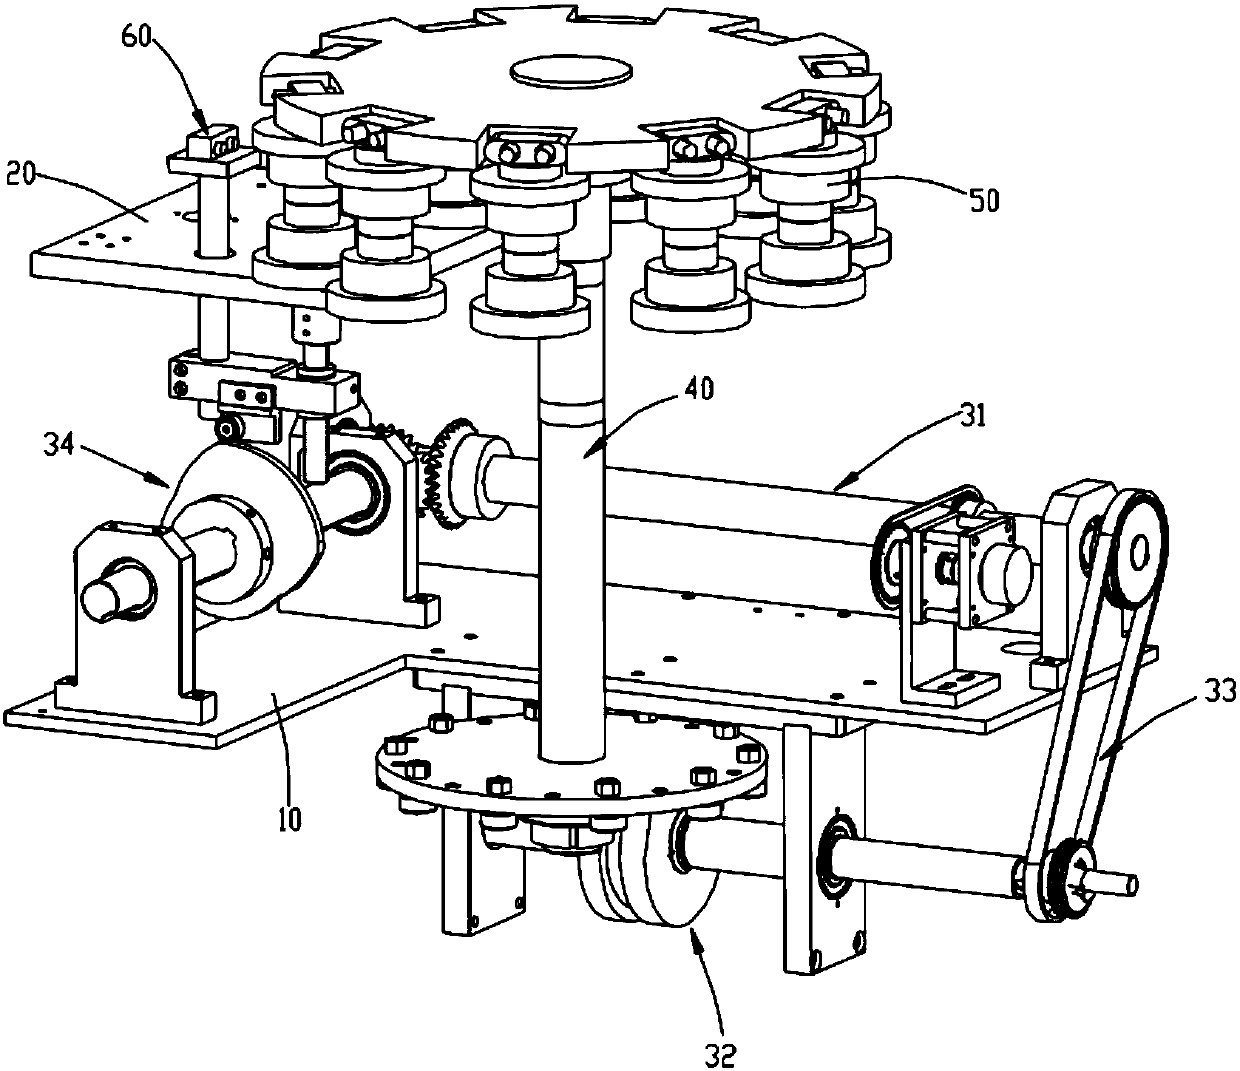 A transmission device for supporting rollers